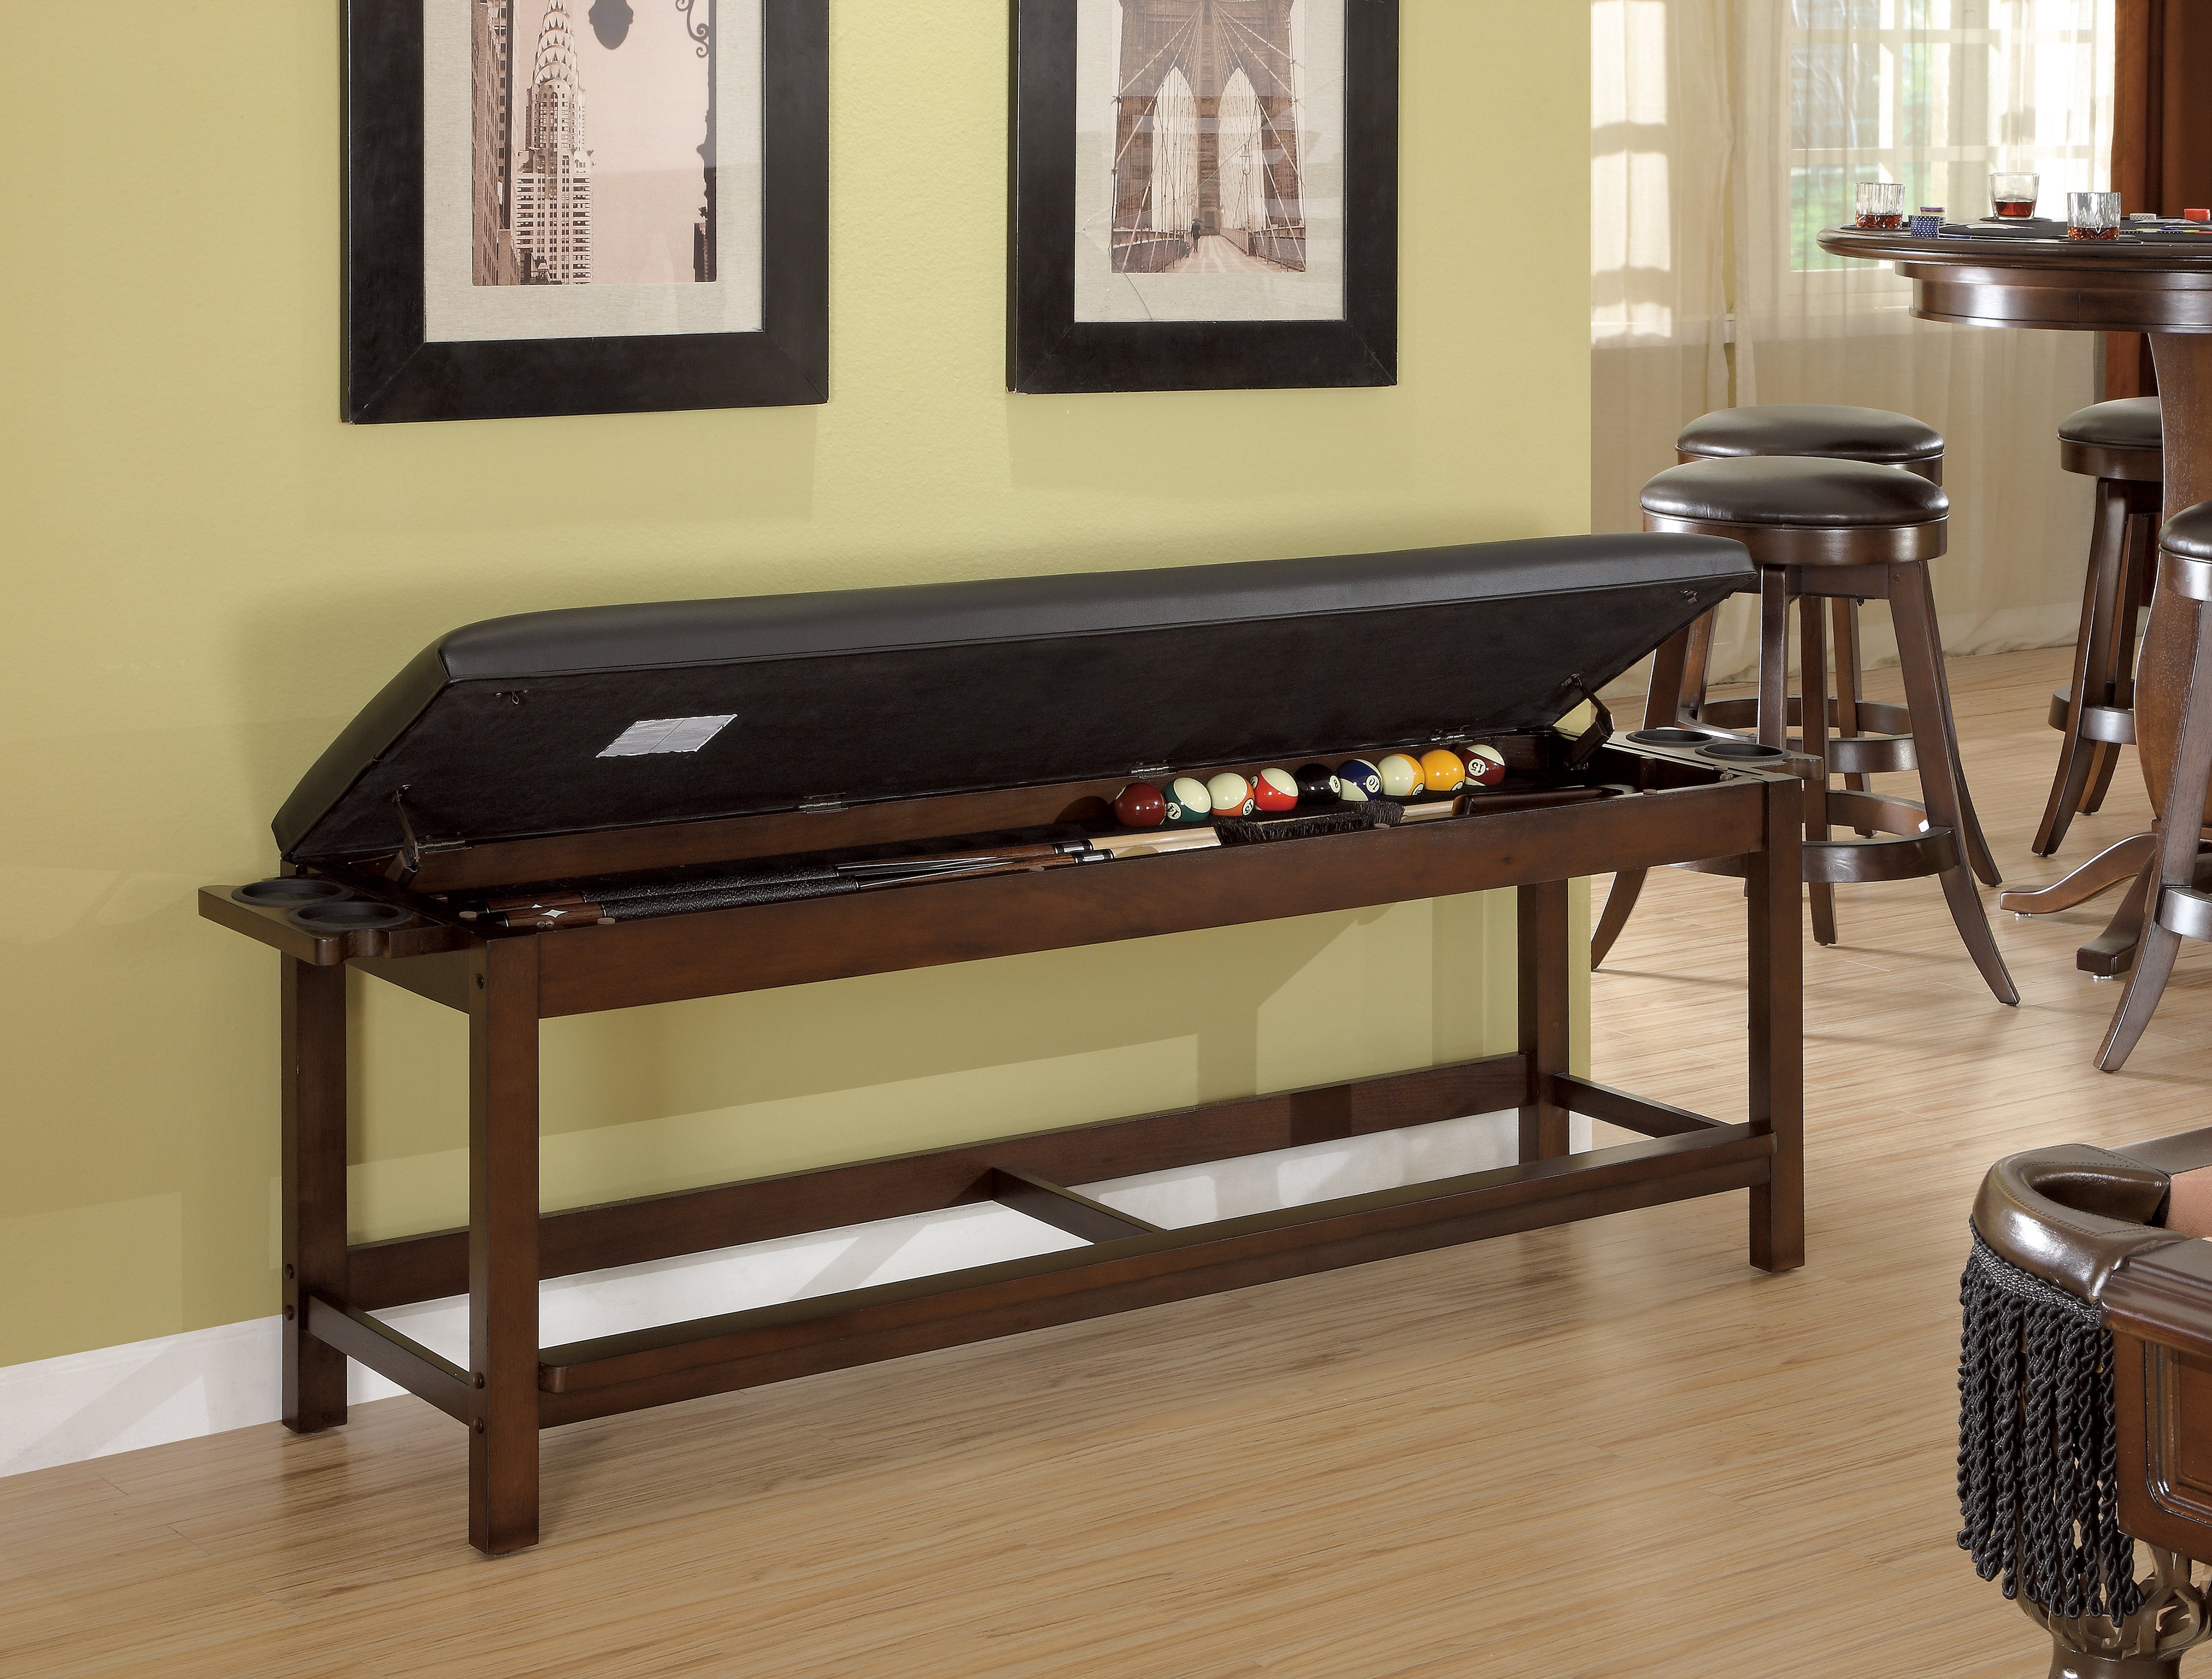 Legacy Billiards Classic Backless Storage Bench Open with Balls and Cues Room Shot